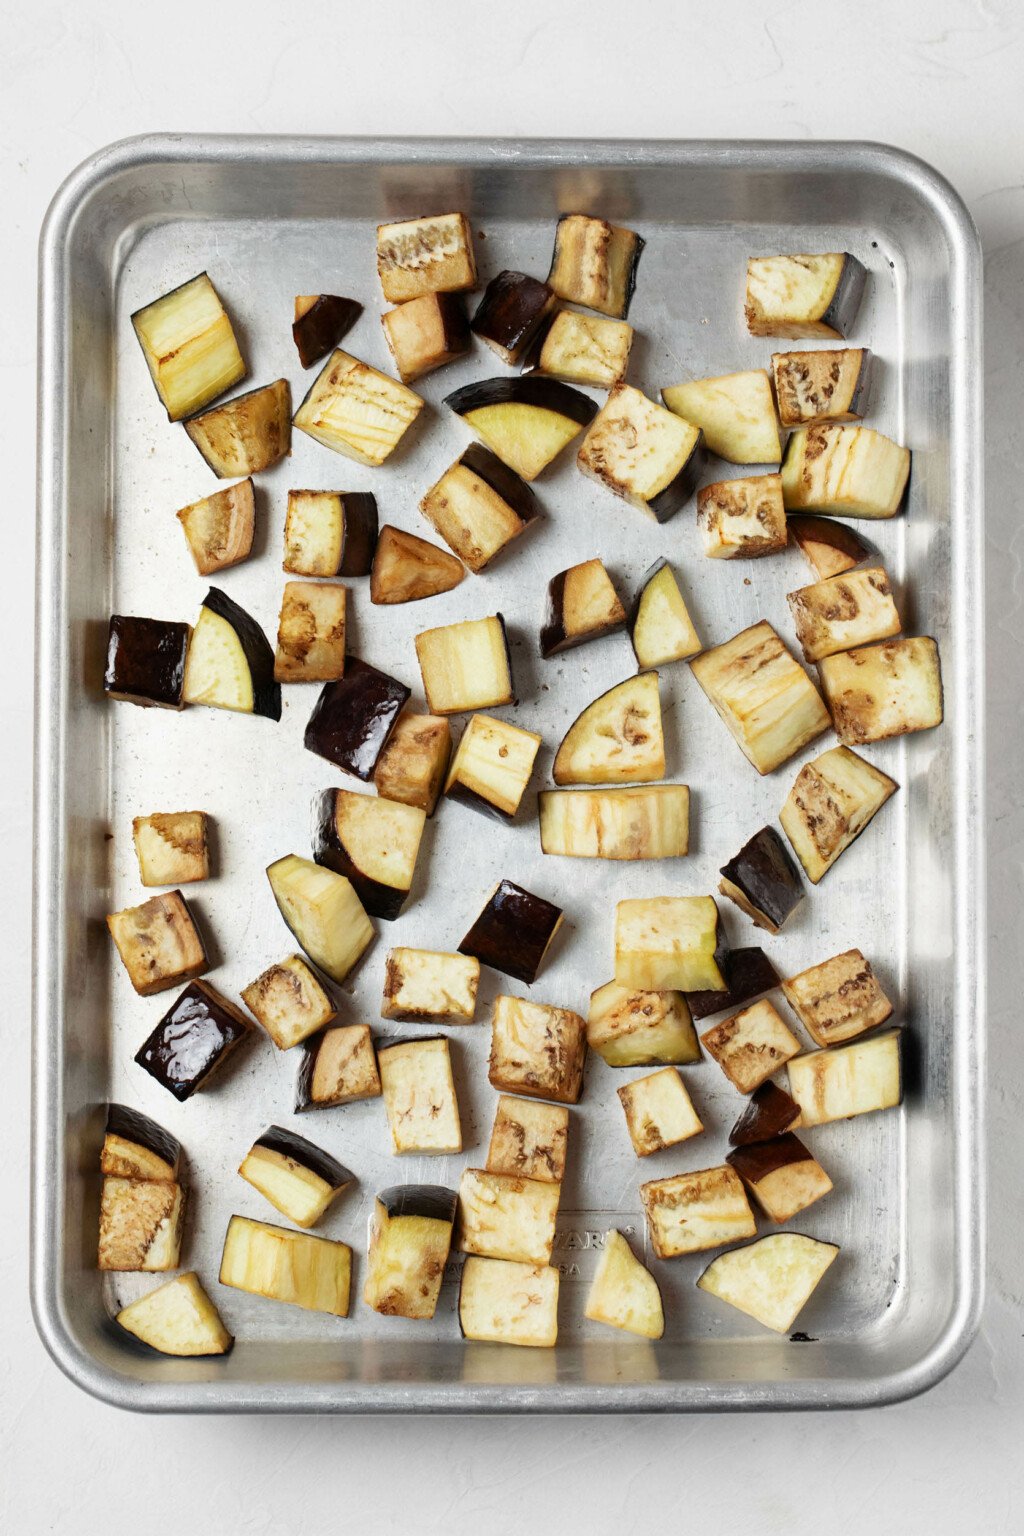 Roasted eggplant cubes are pictured on a rimmed, silver baking sheet.